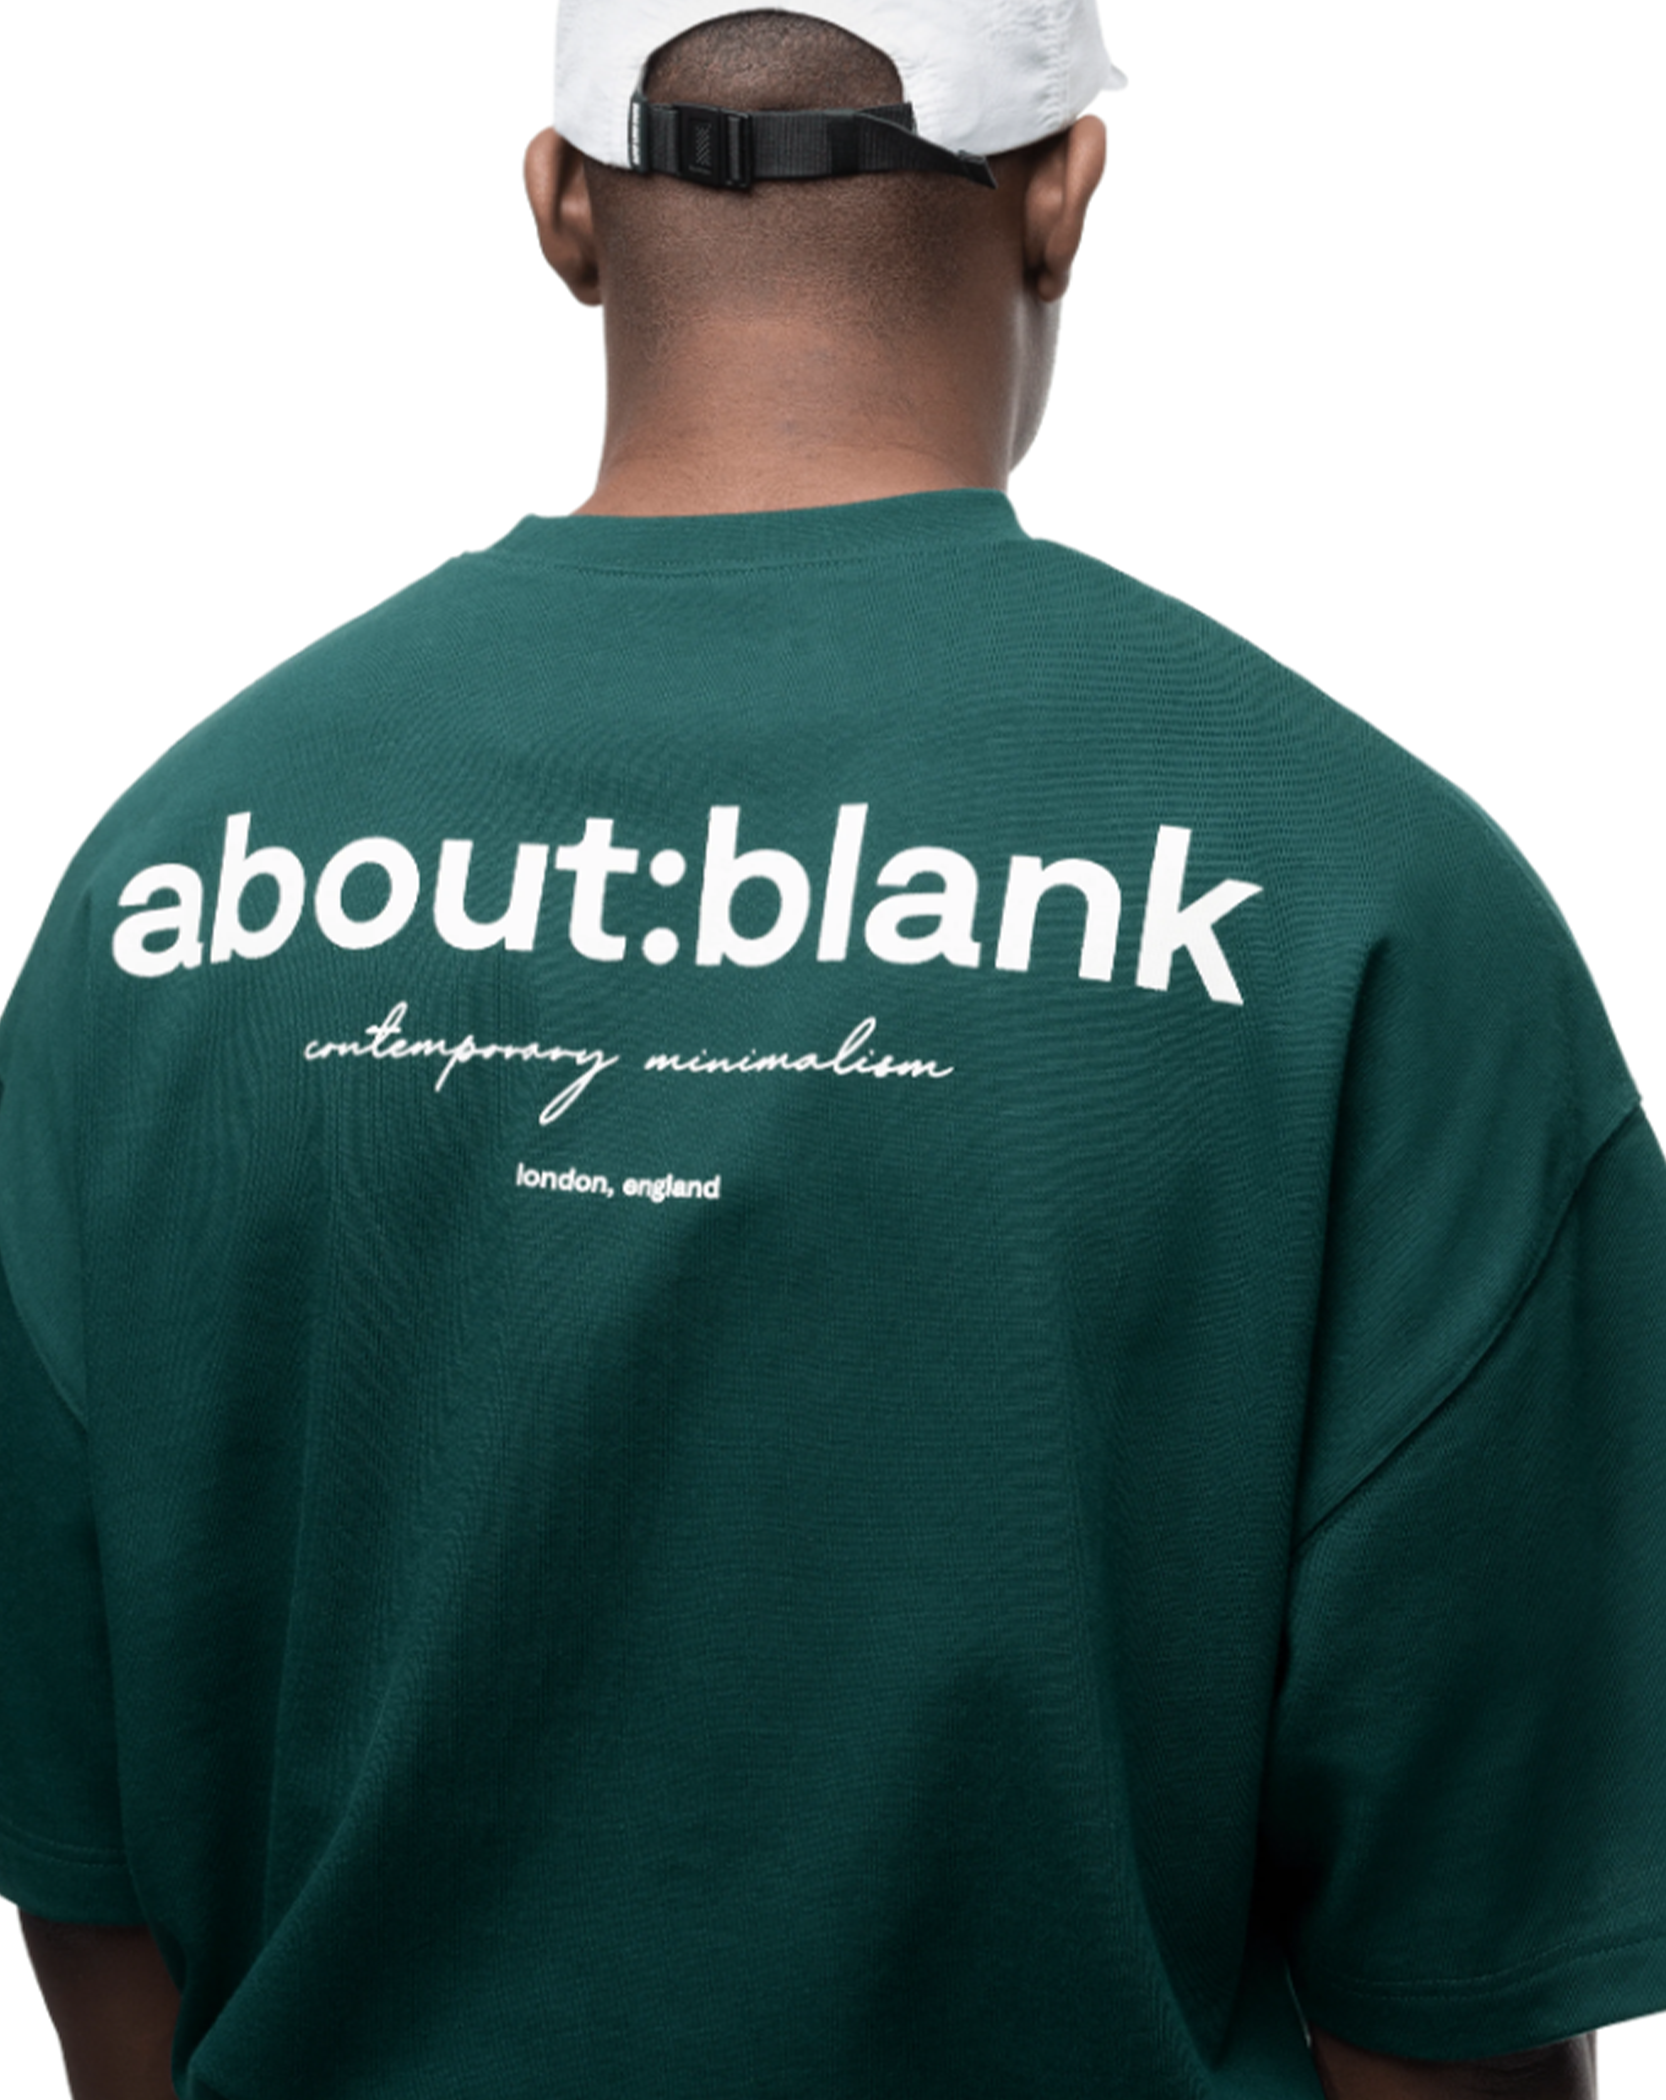 About blank - green